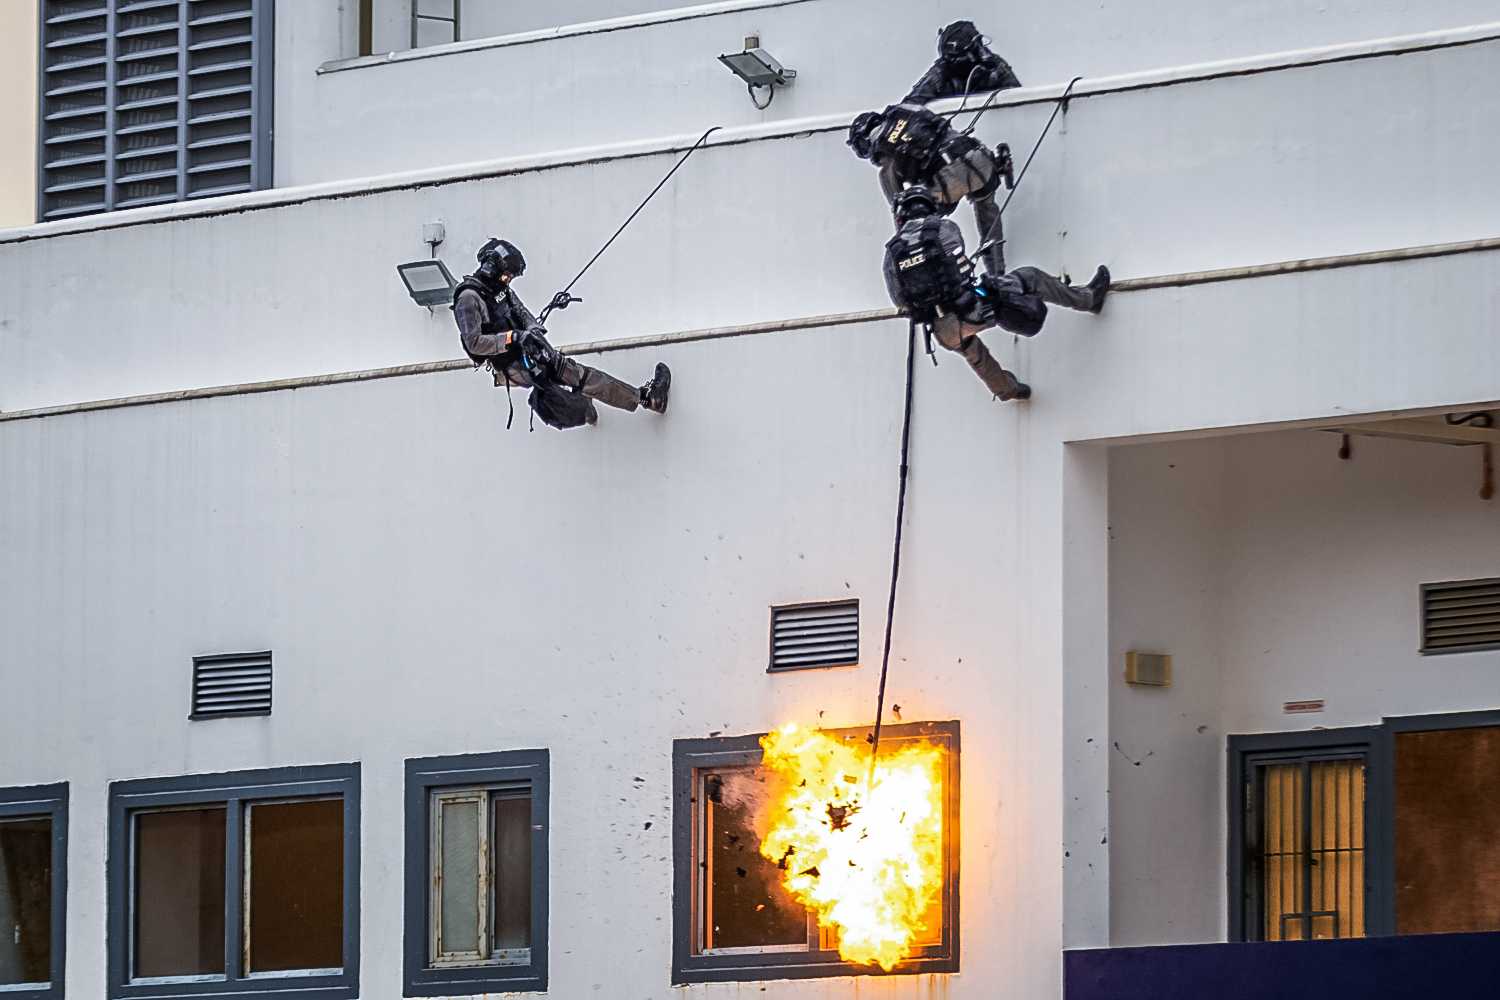 three police officers in black uniforms rappelling down a building with white walls and detonating an explosive at the window below to gain access.